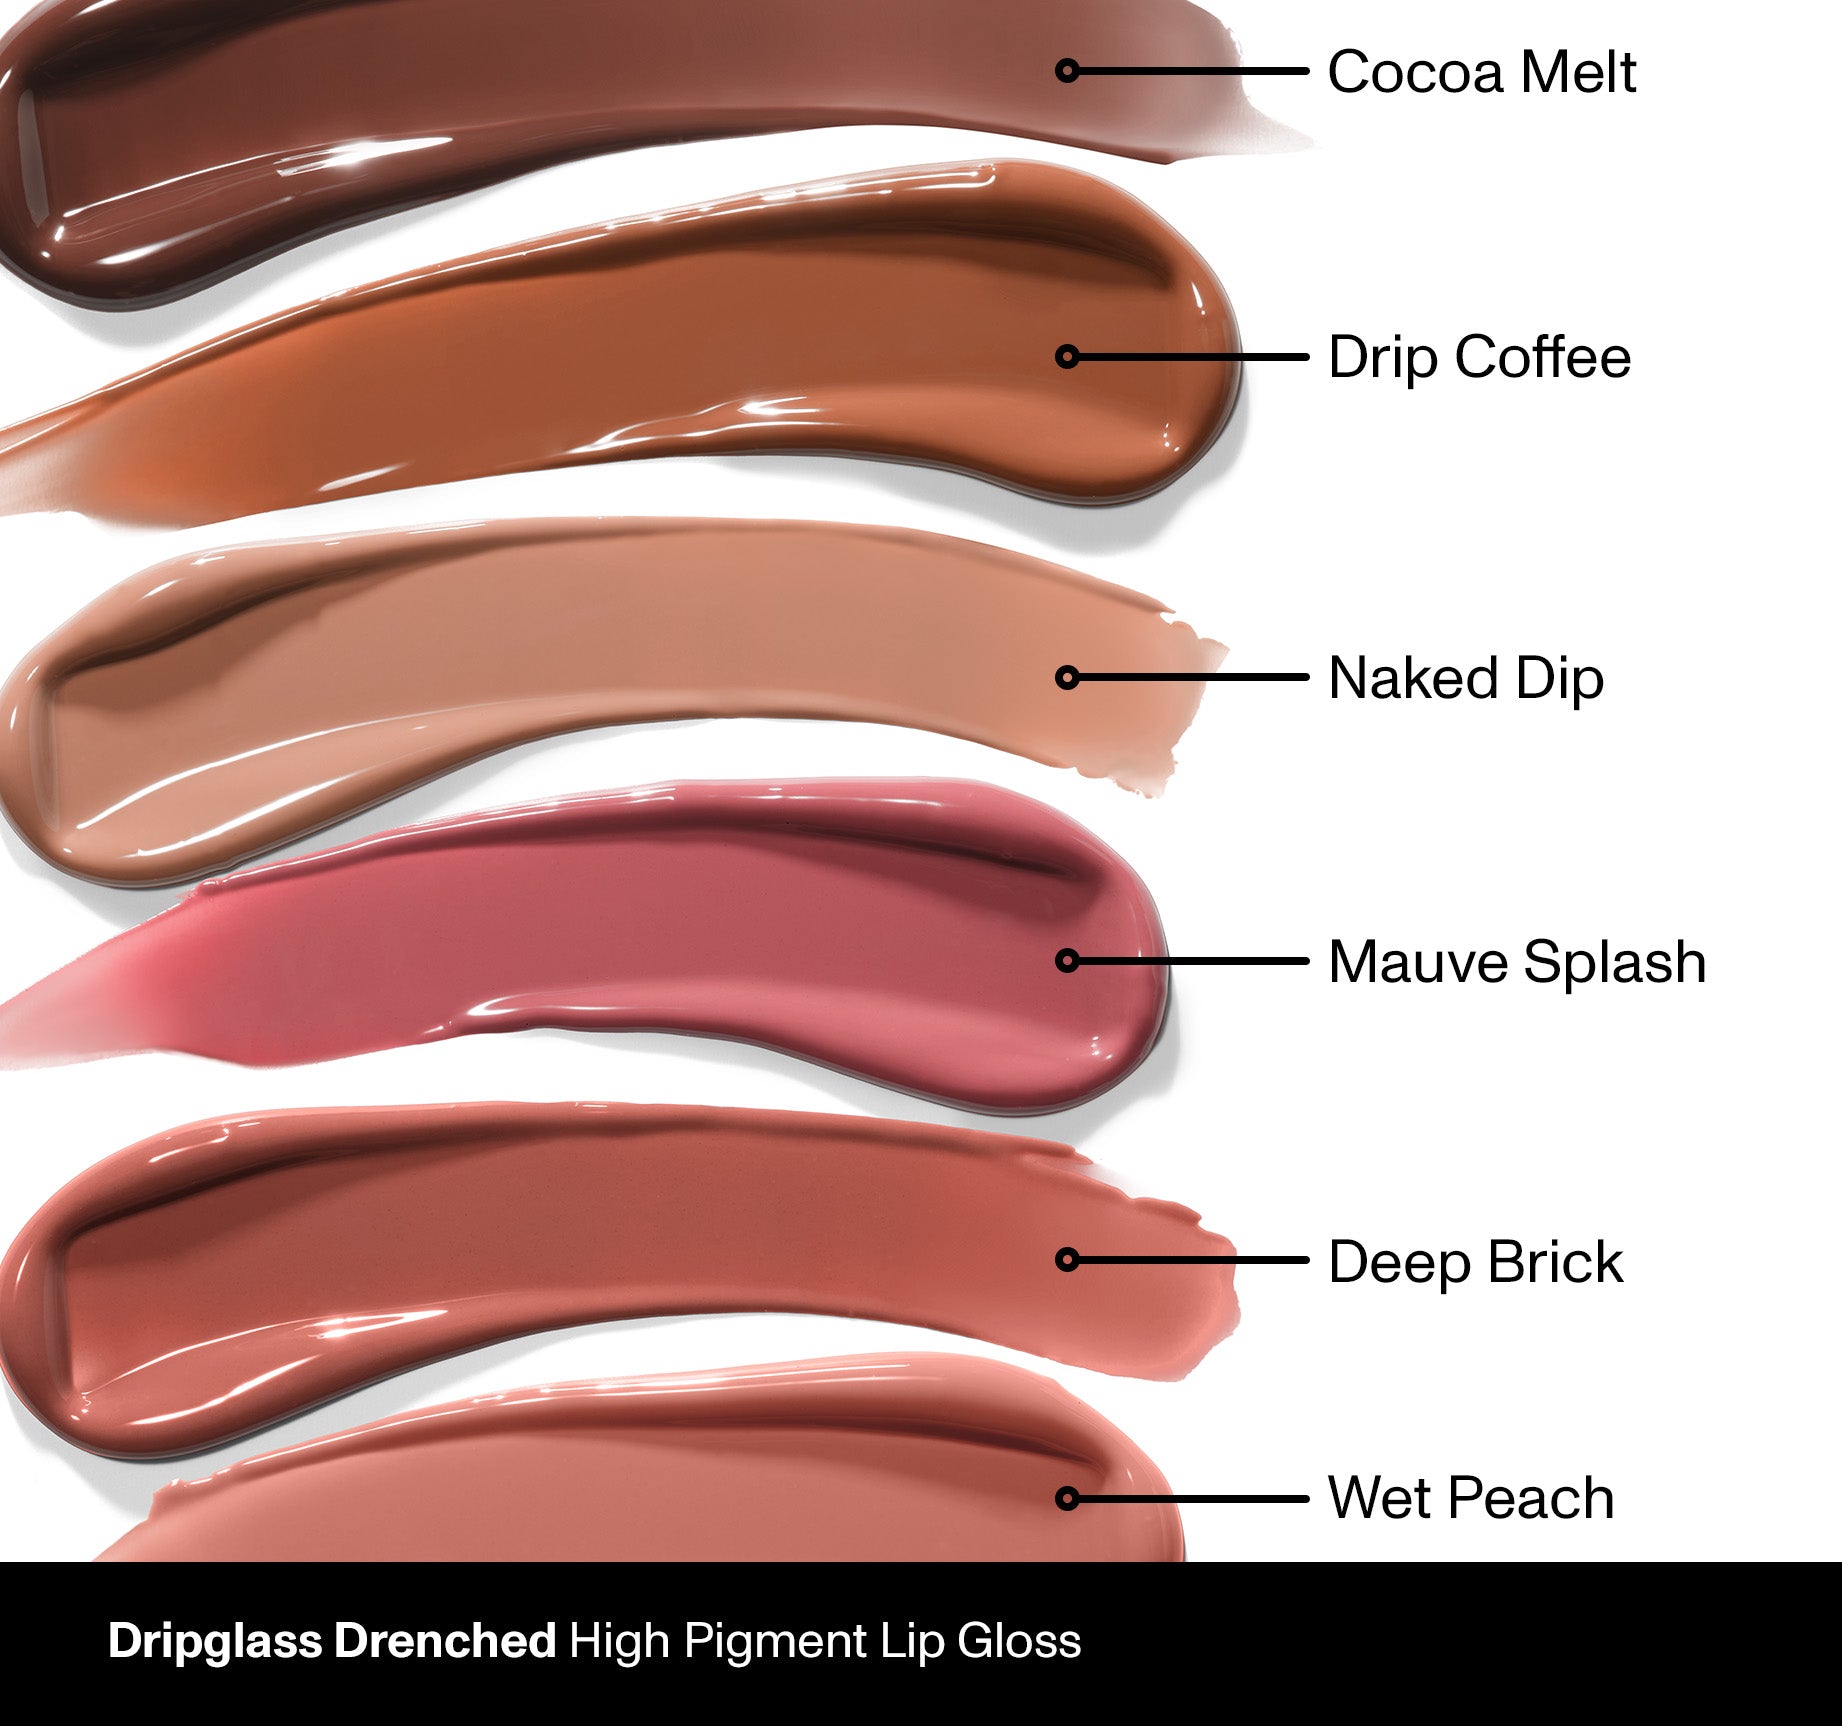 Dripglass Drenched High Pigment Lip Gloss - Wet Peach - Image 6